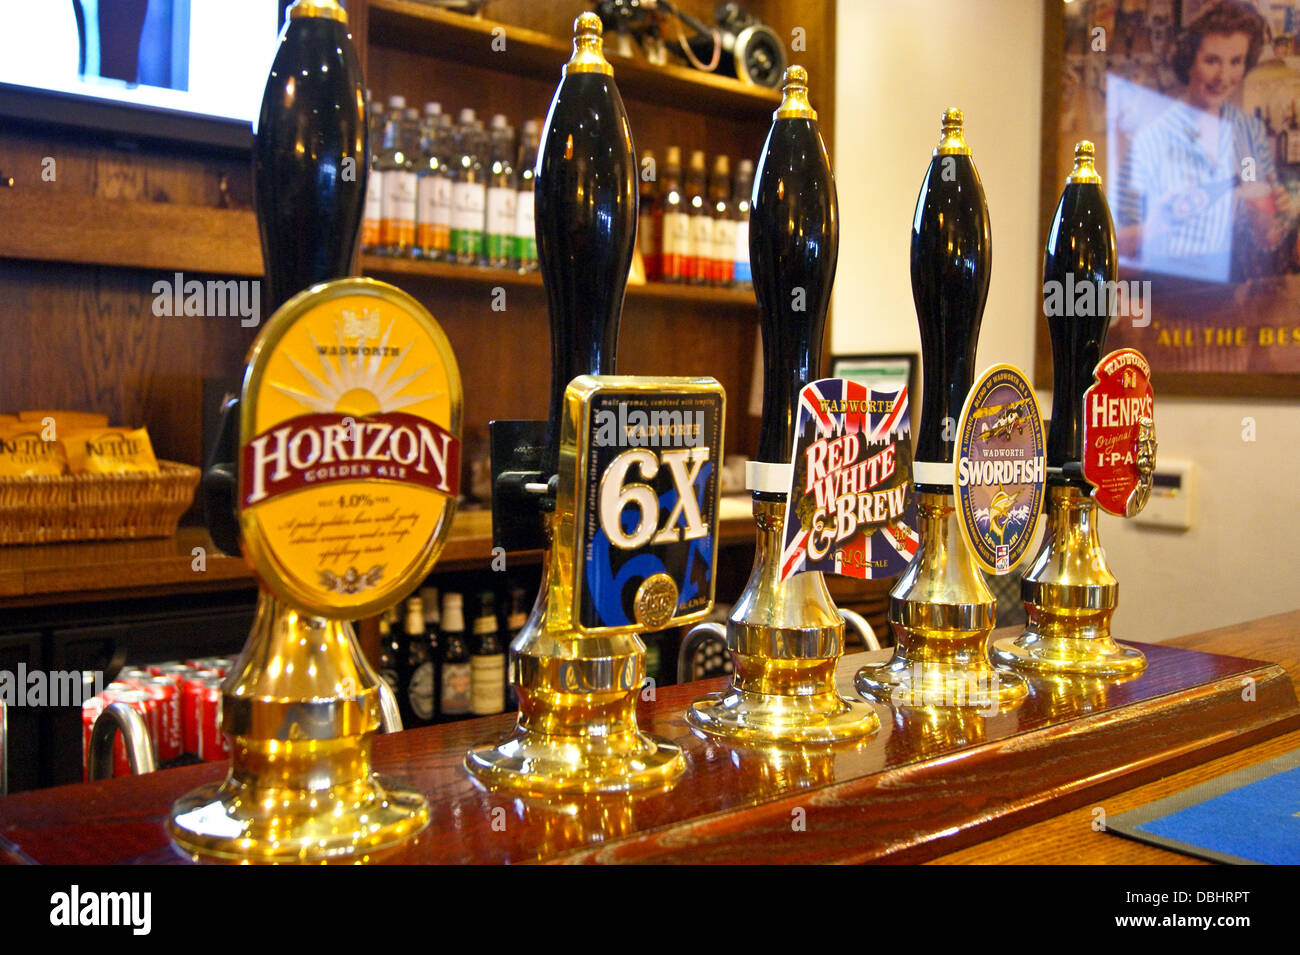 Wadworth of Devizes real ale handpumps and pump clips on a pub bar Stock Photo